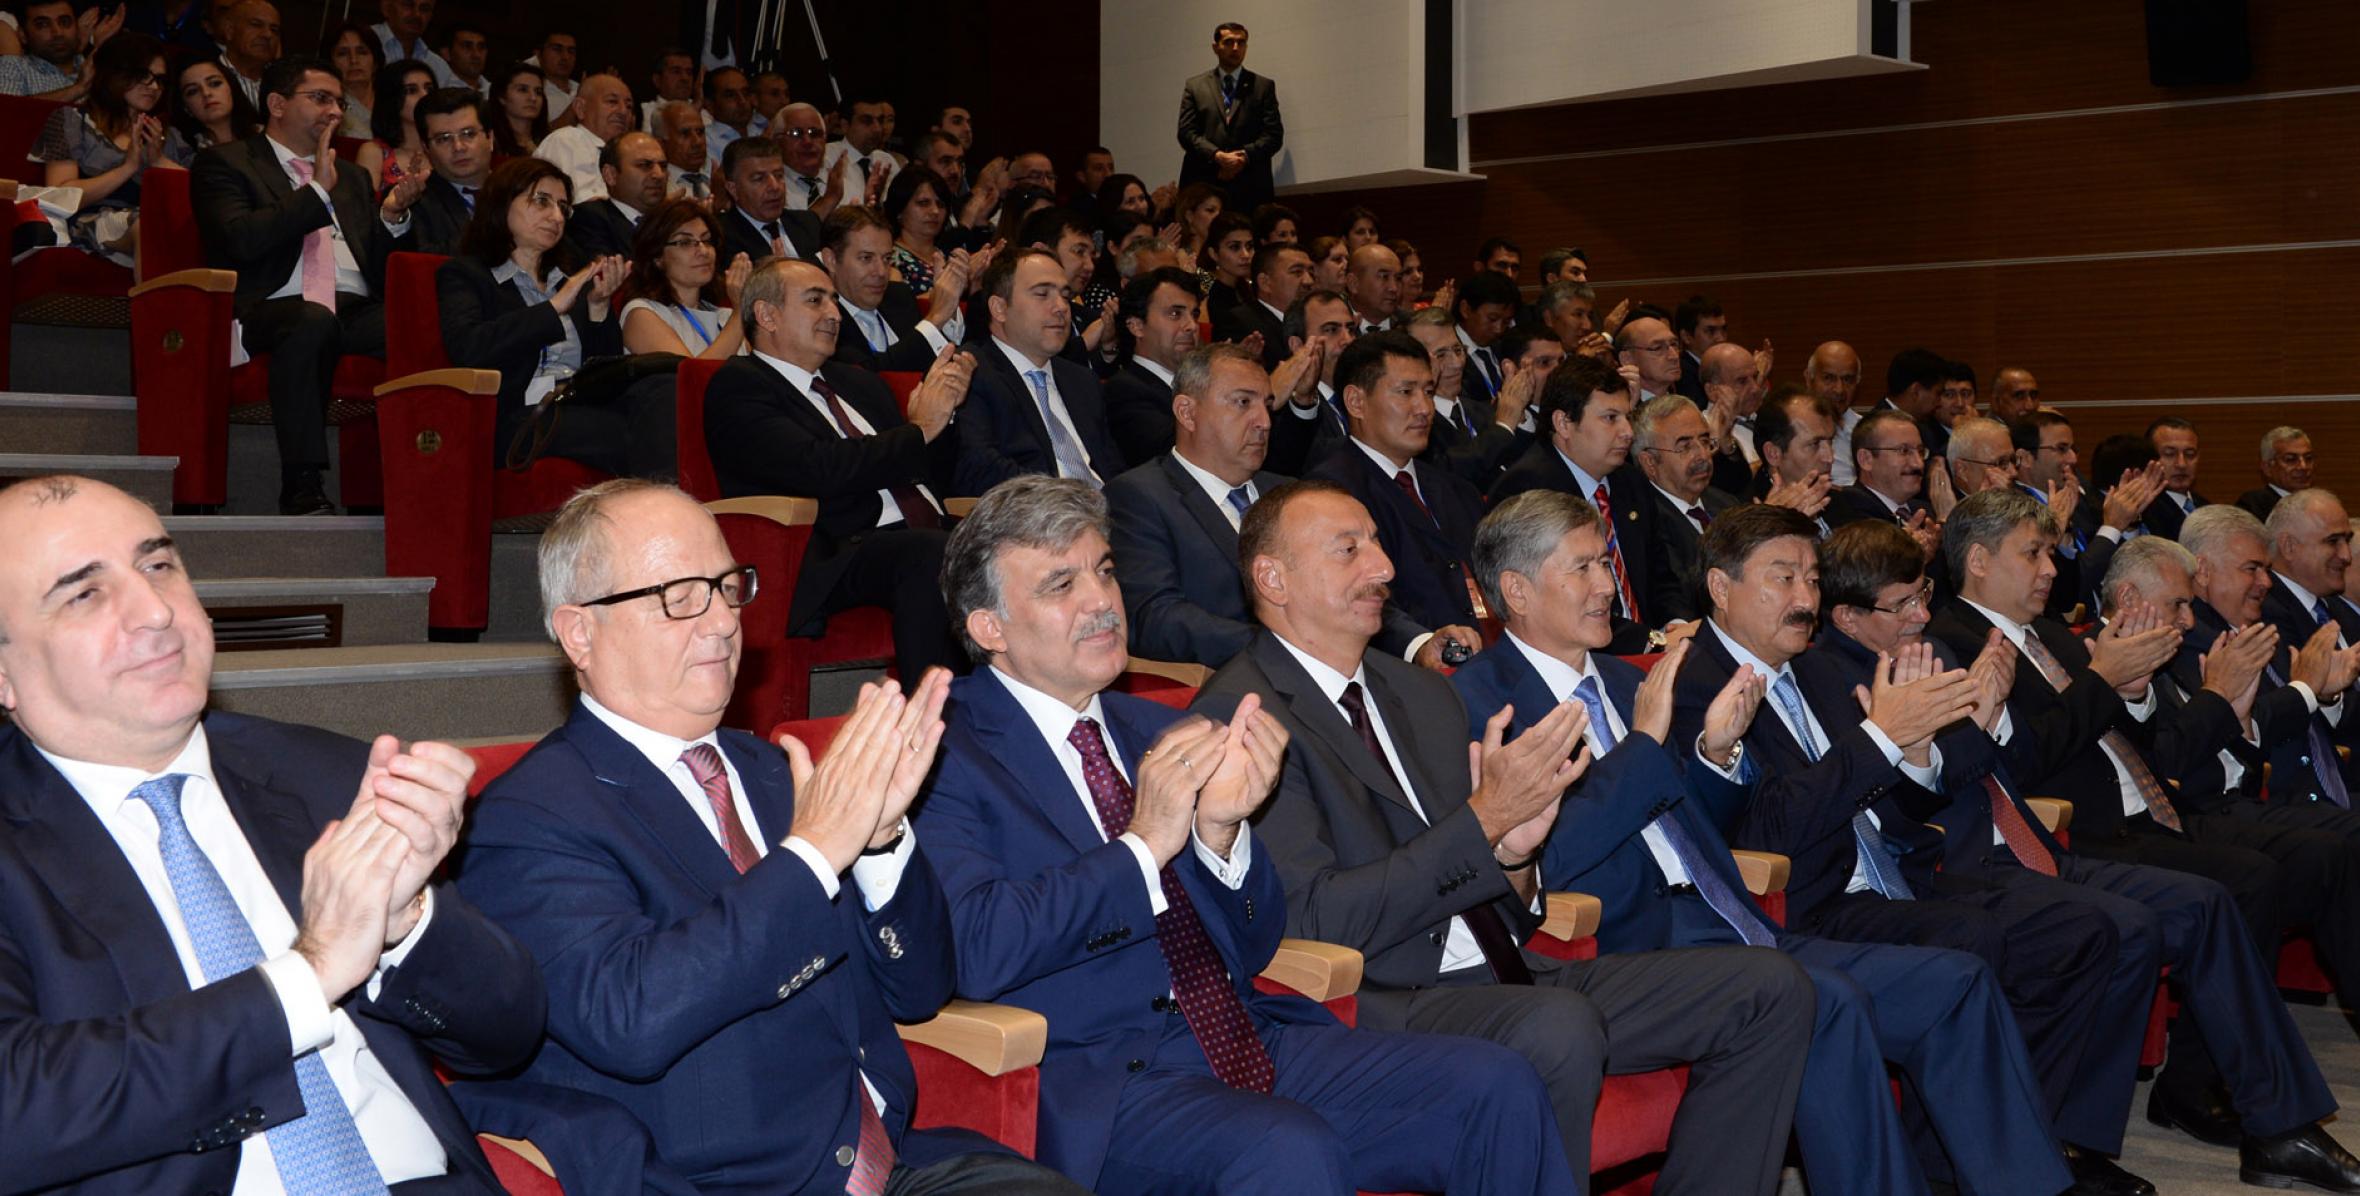 Presidents of Azerbaijan, Turkey and Kyrgyzstan attended a concert within the framework of the Third Summit of the Cooperation Council of Turkic-speaking States